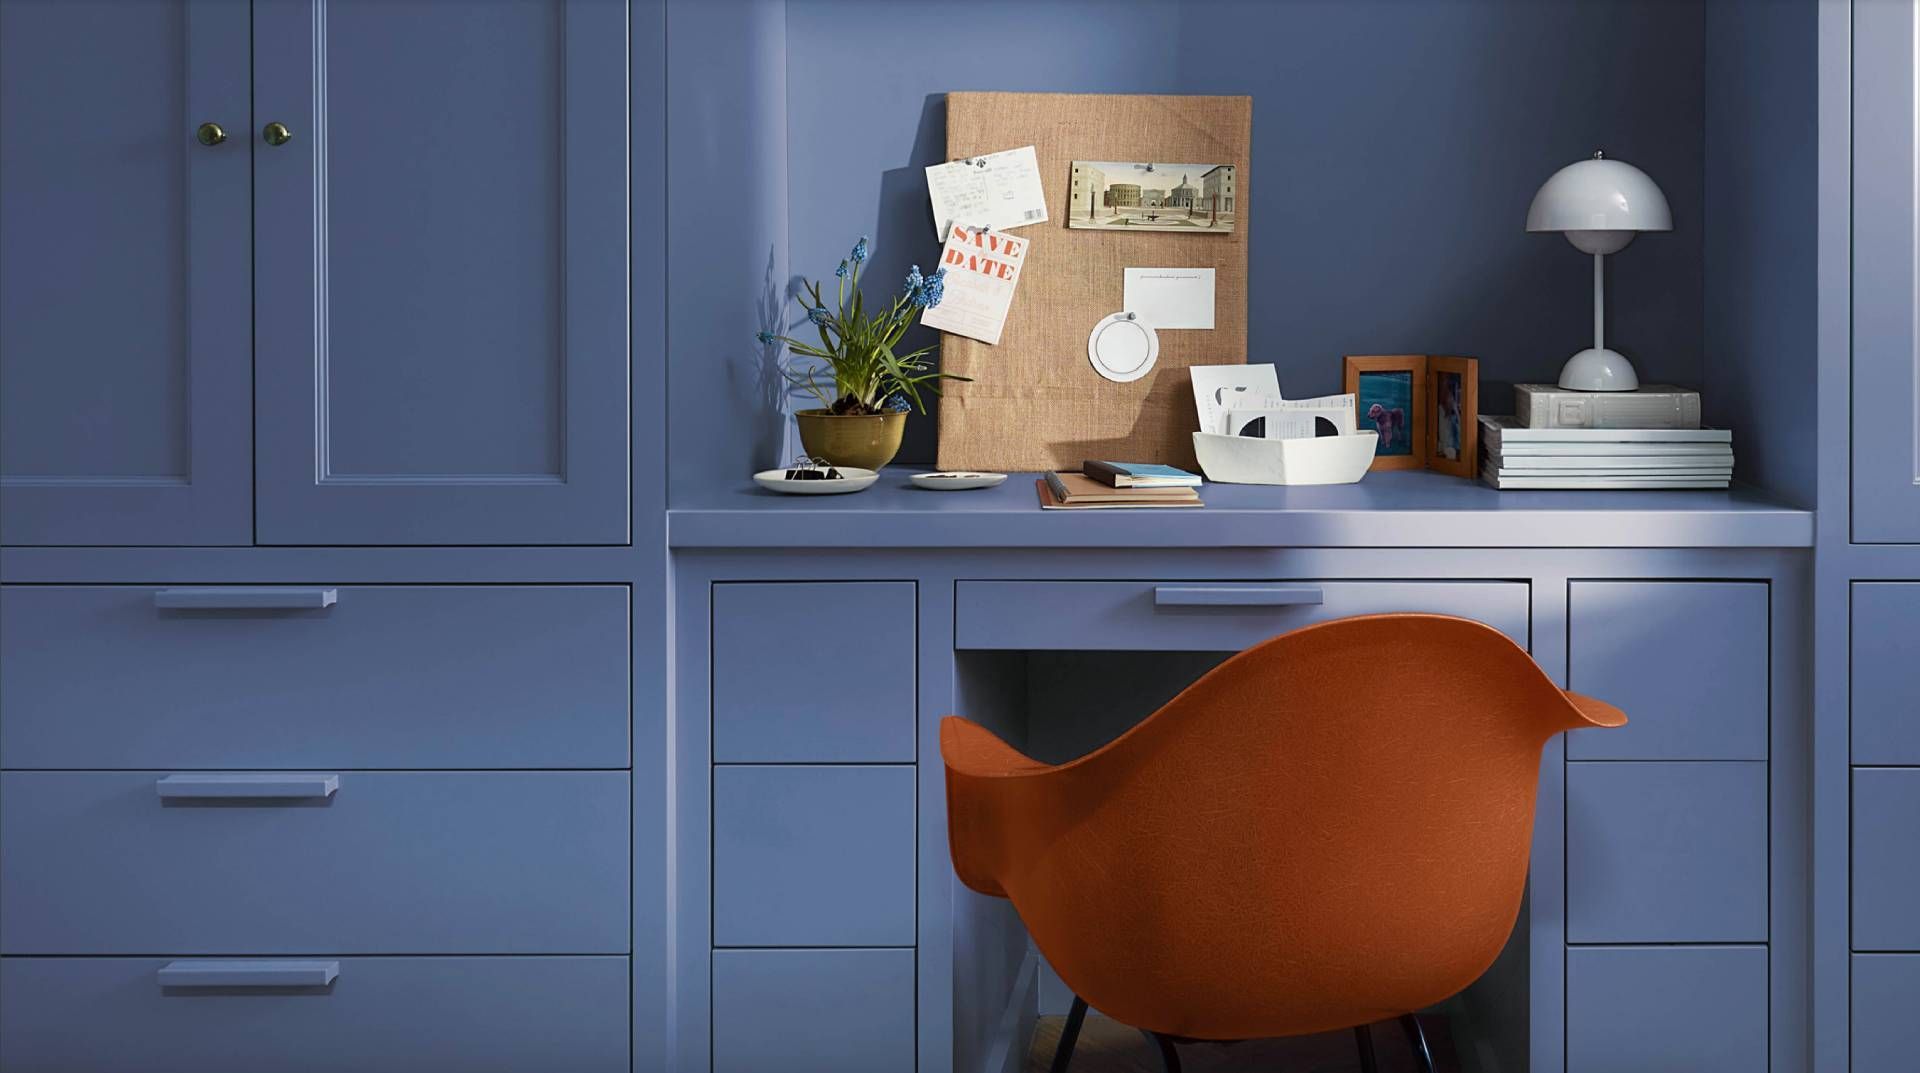 Bright orange chair sat in front of a desk and wall painted Blue Nova